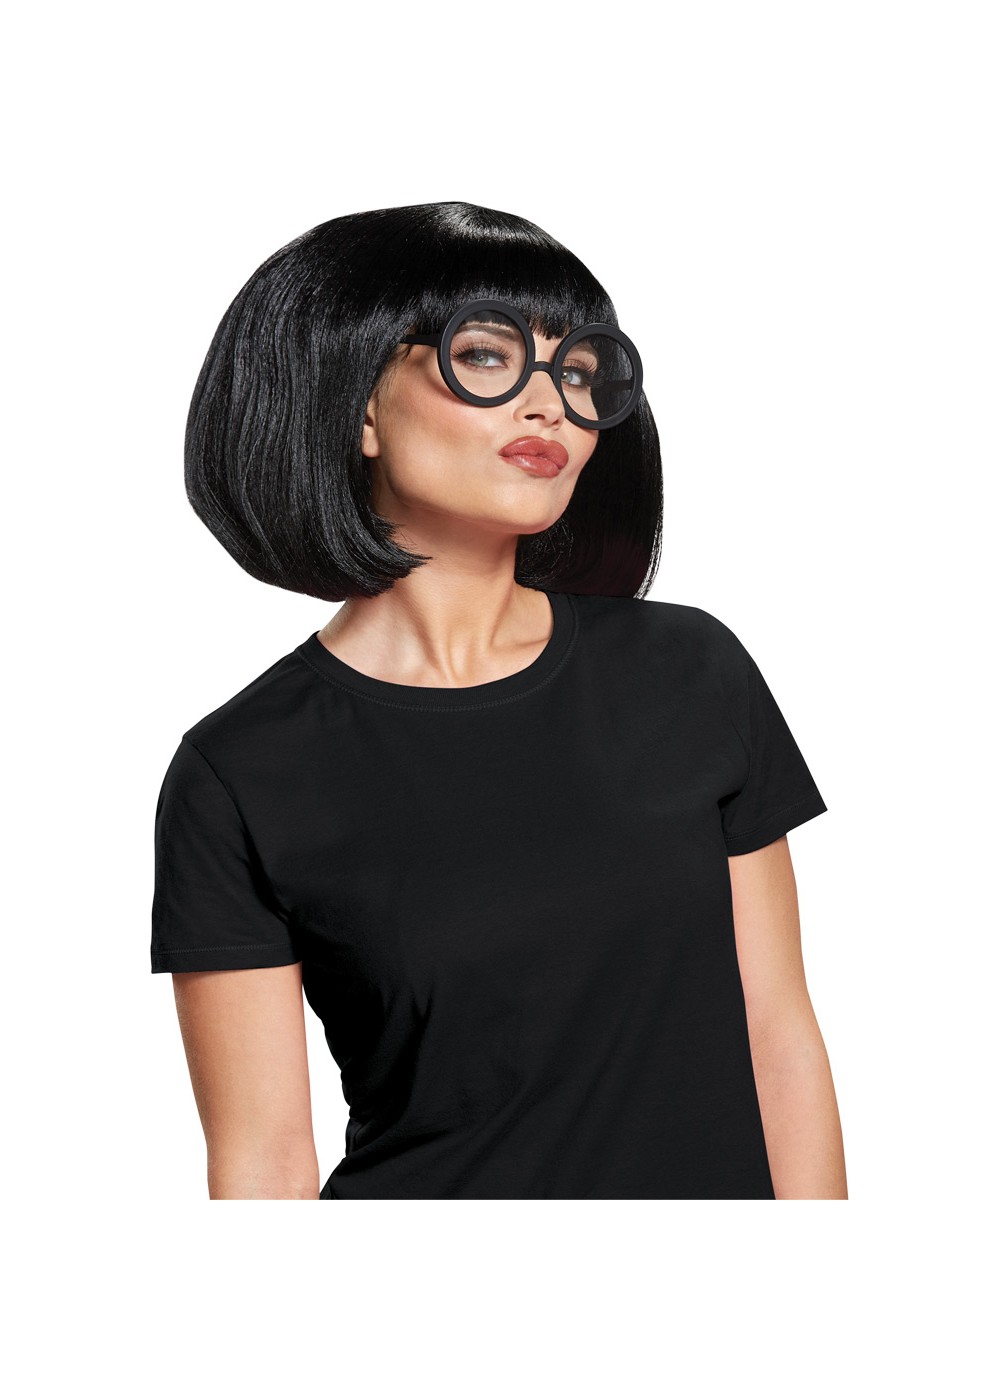 Incredibles Edna Accessory Kit